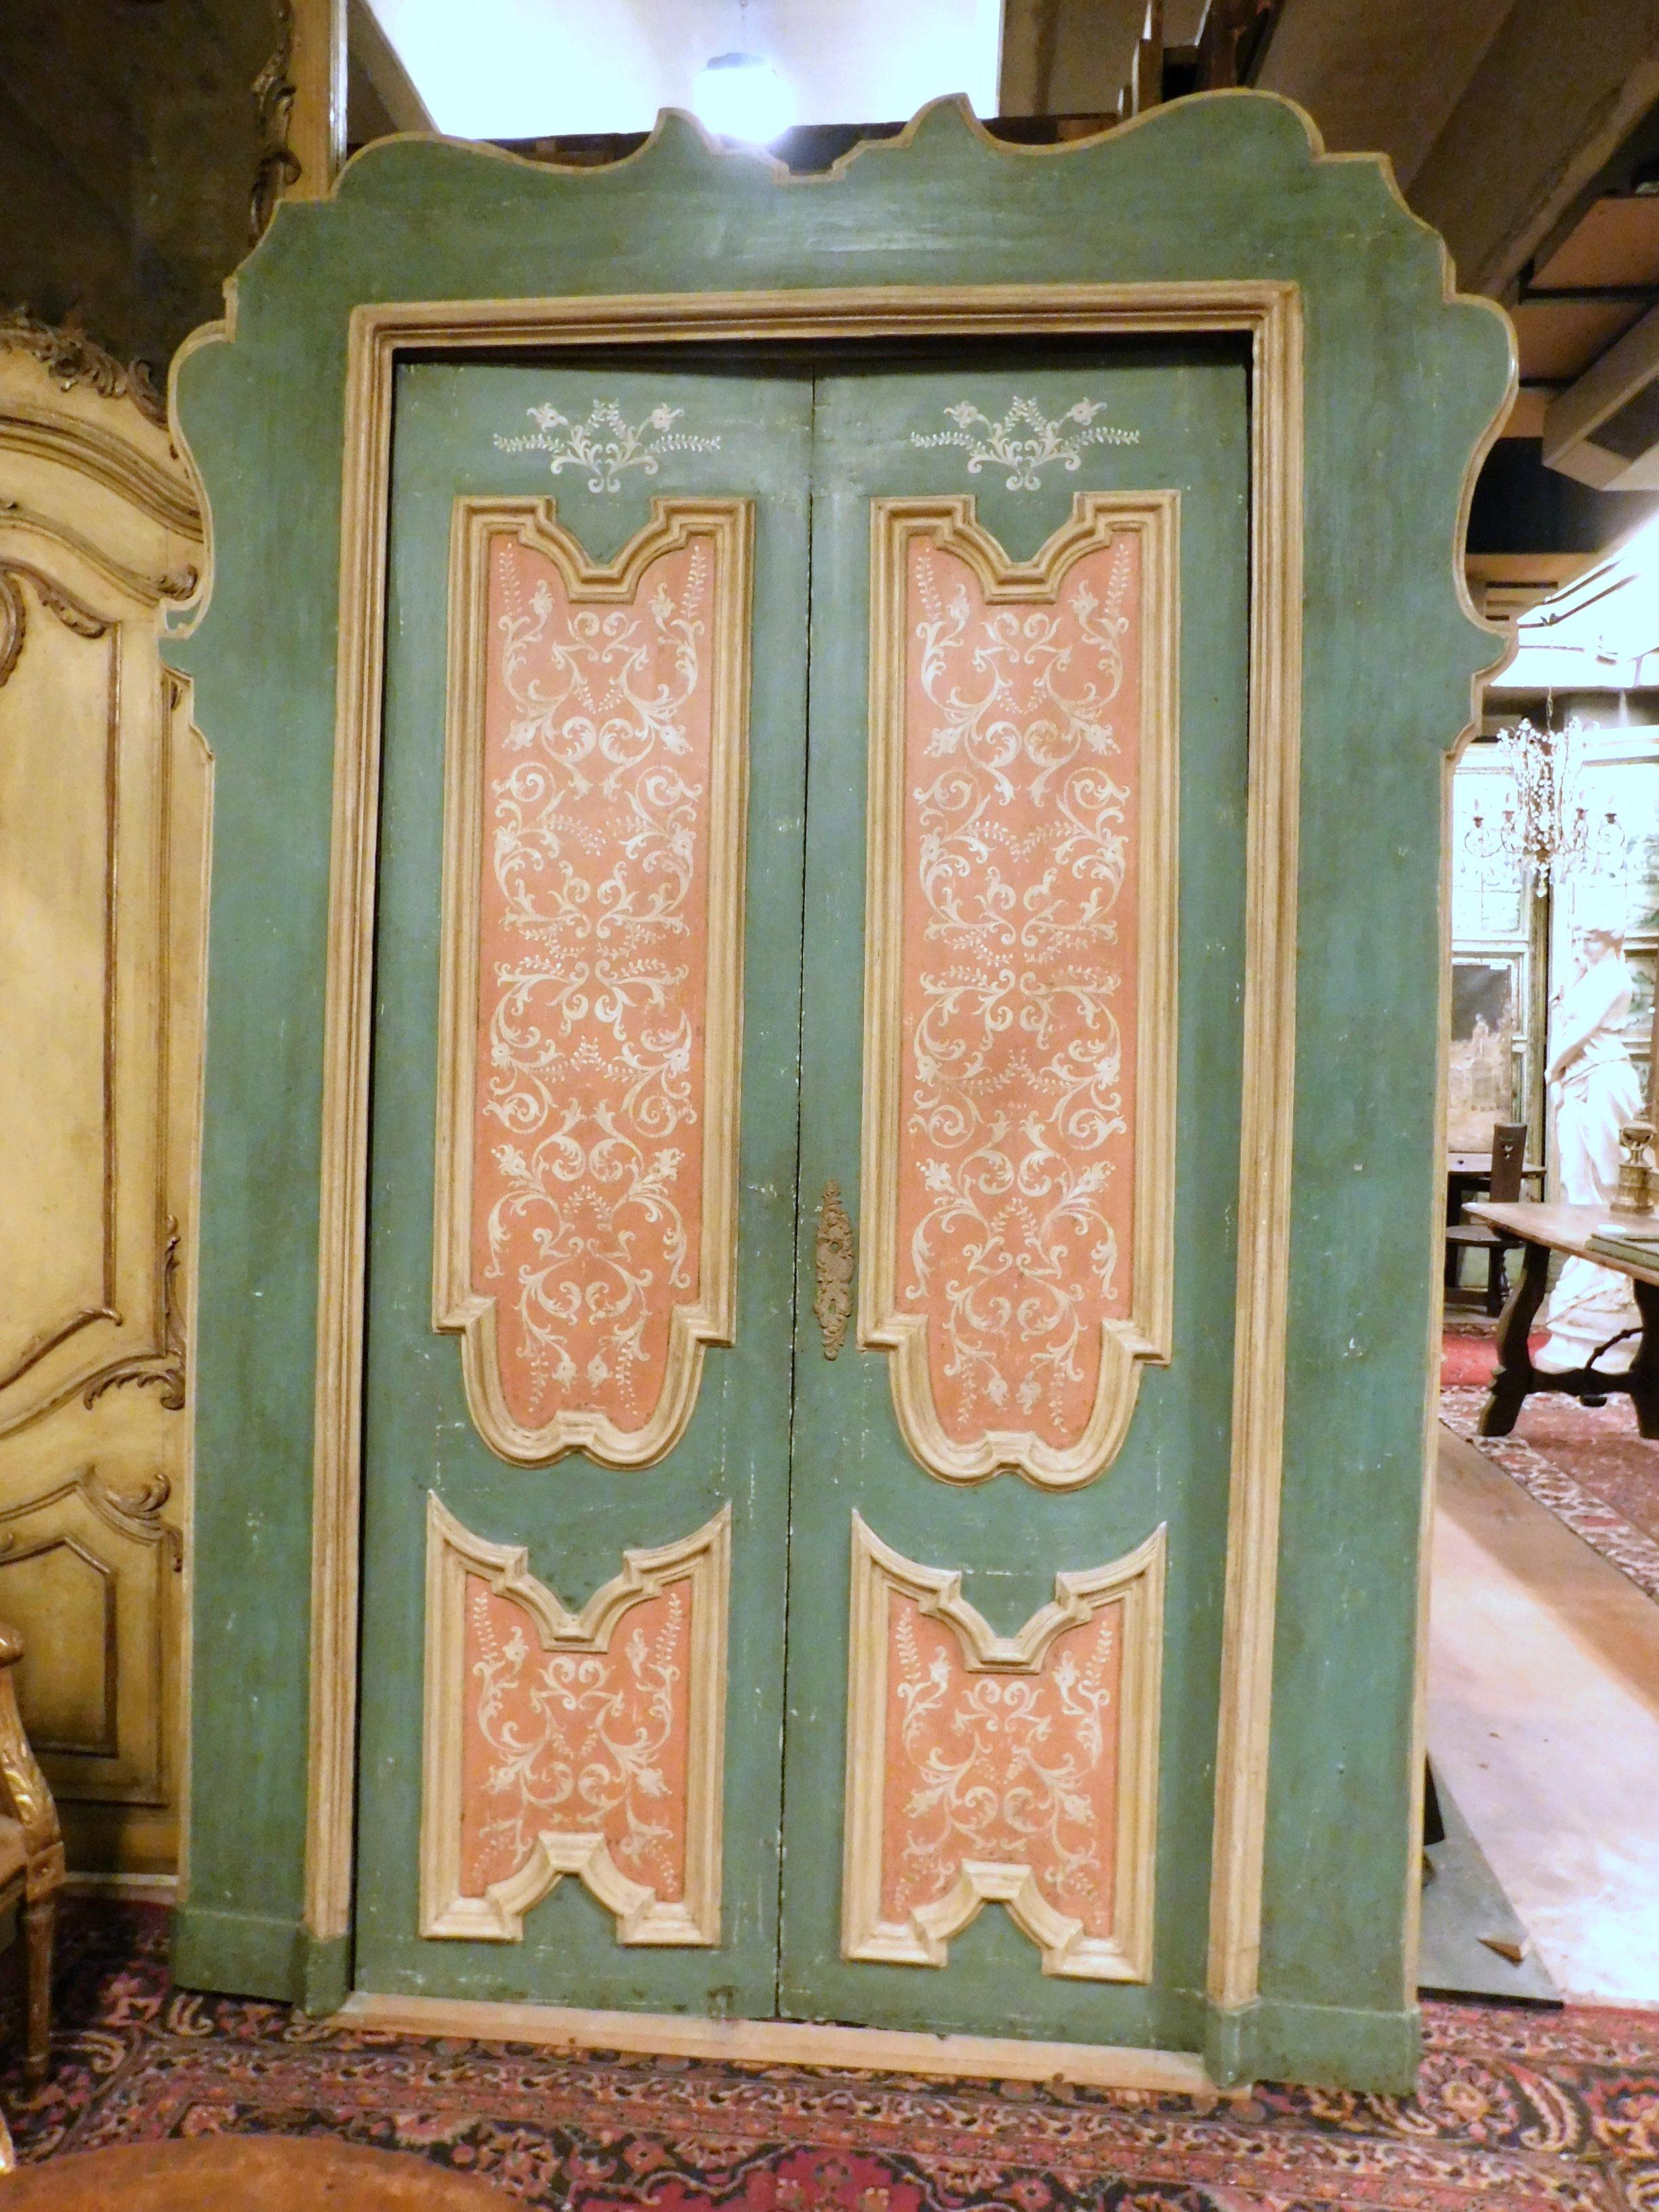 Antique pair of interior doors, hand-lacquered on a blue and pink background, with white paintings, complete with original wavy frame, typical doors of the 18th century, coming from the hall of an important building in central Rome (Italy).
Ideal